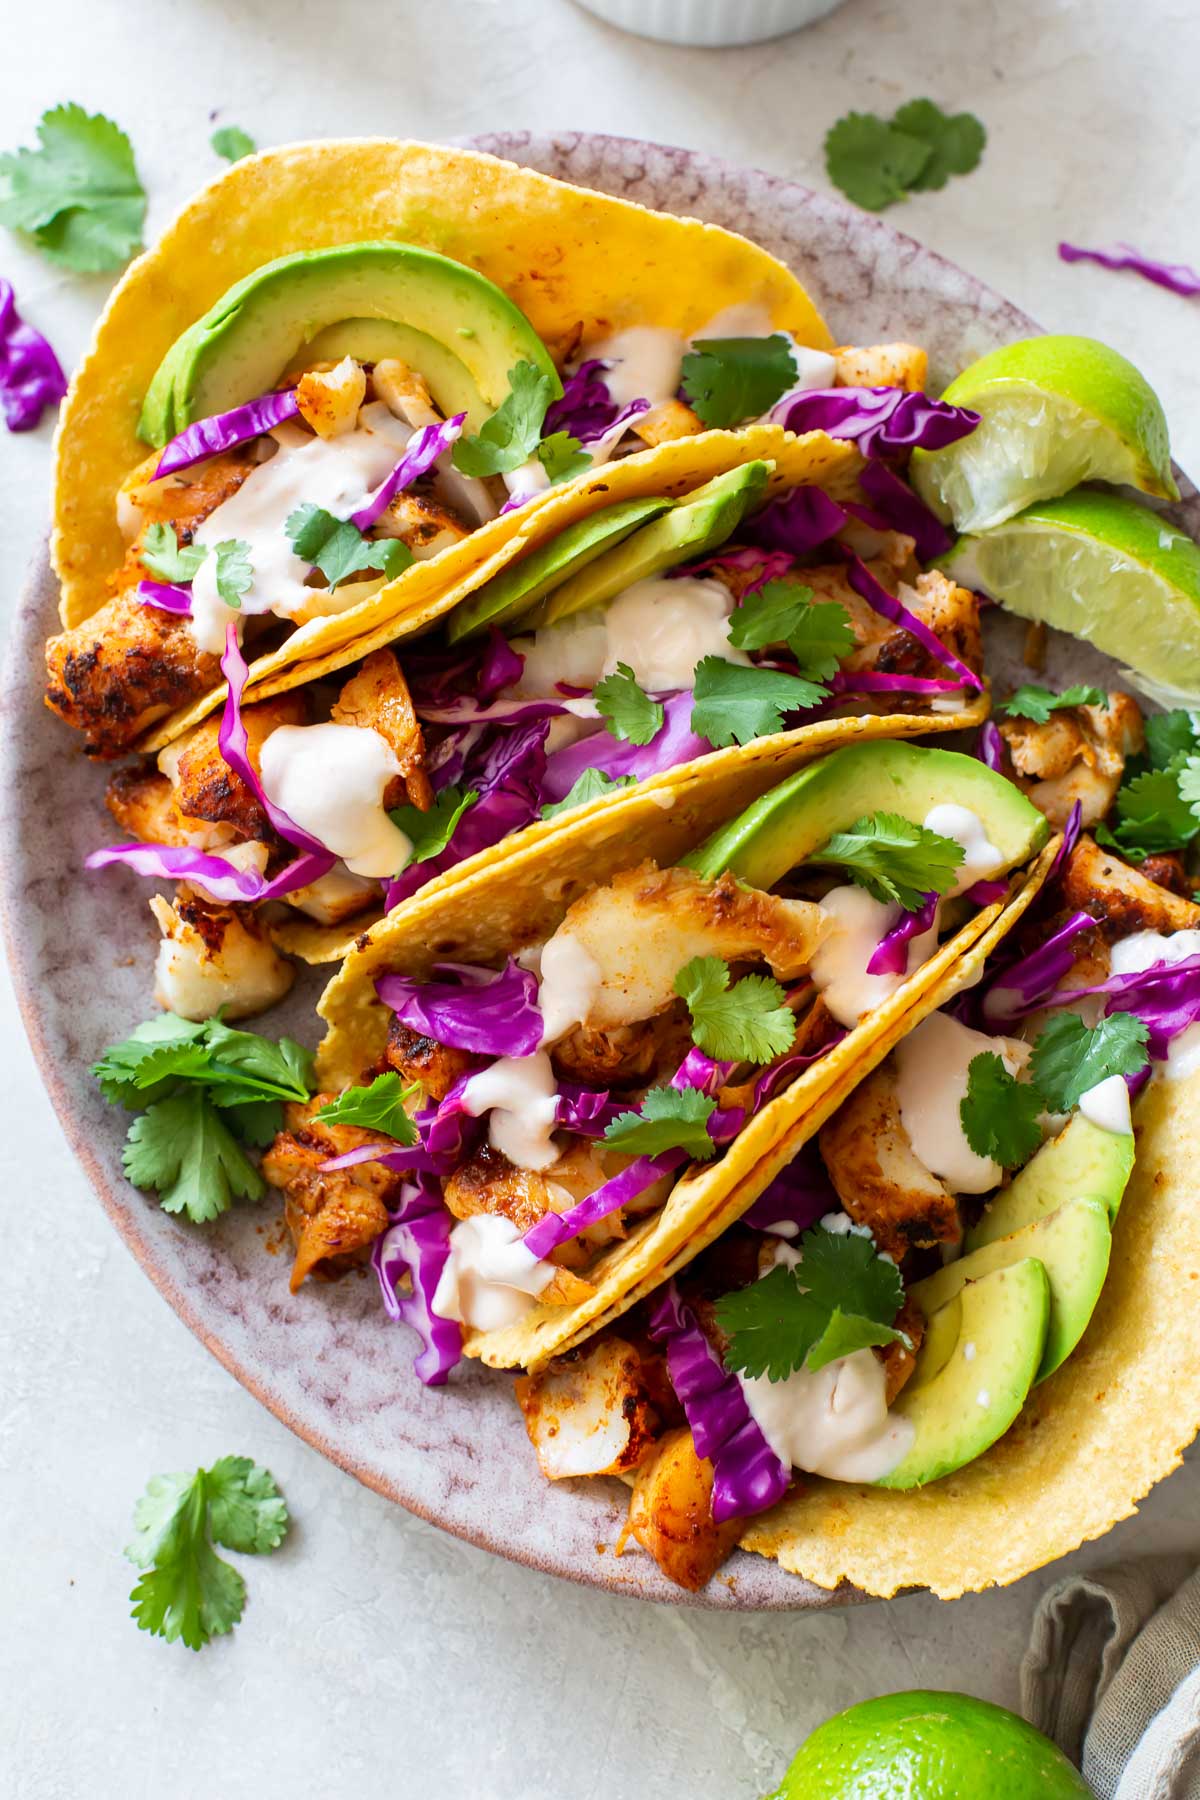 Easy Fish Tacos - The BEST Fish Taco Recipe with Fish Taco Sauce!